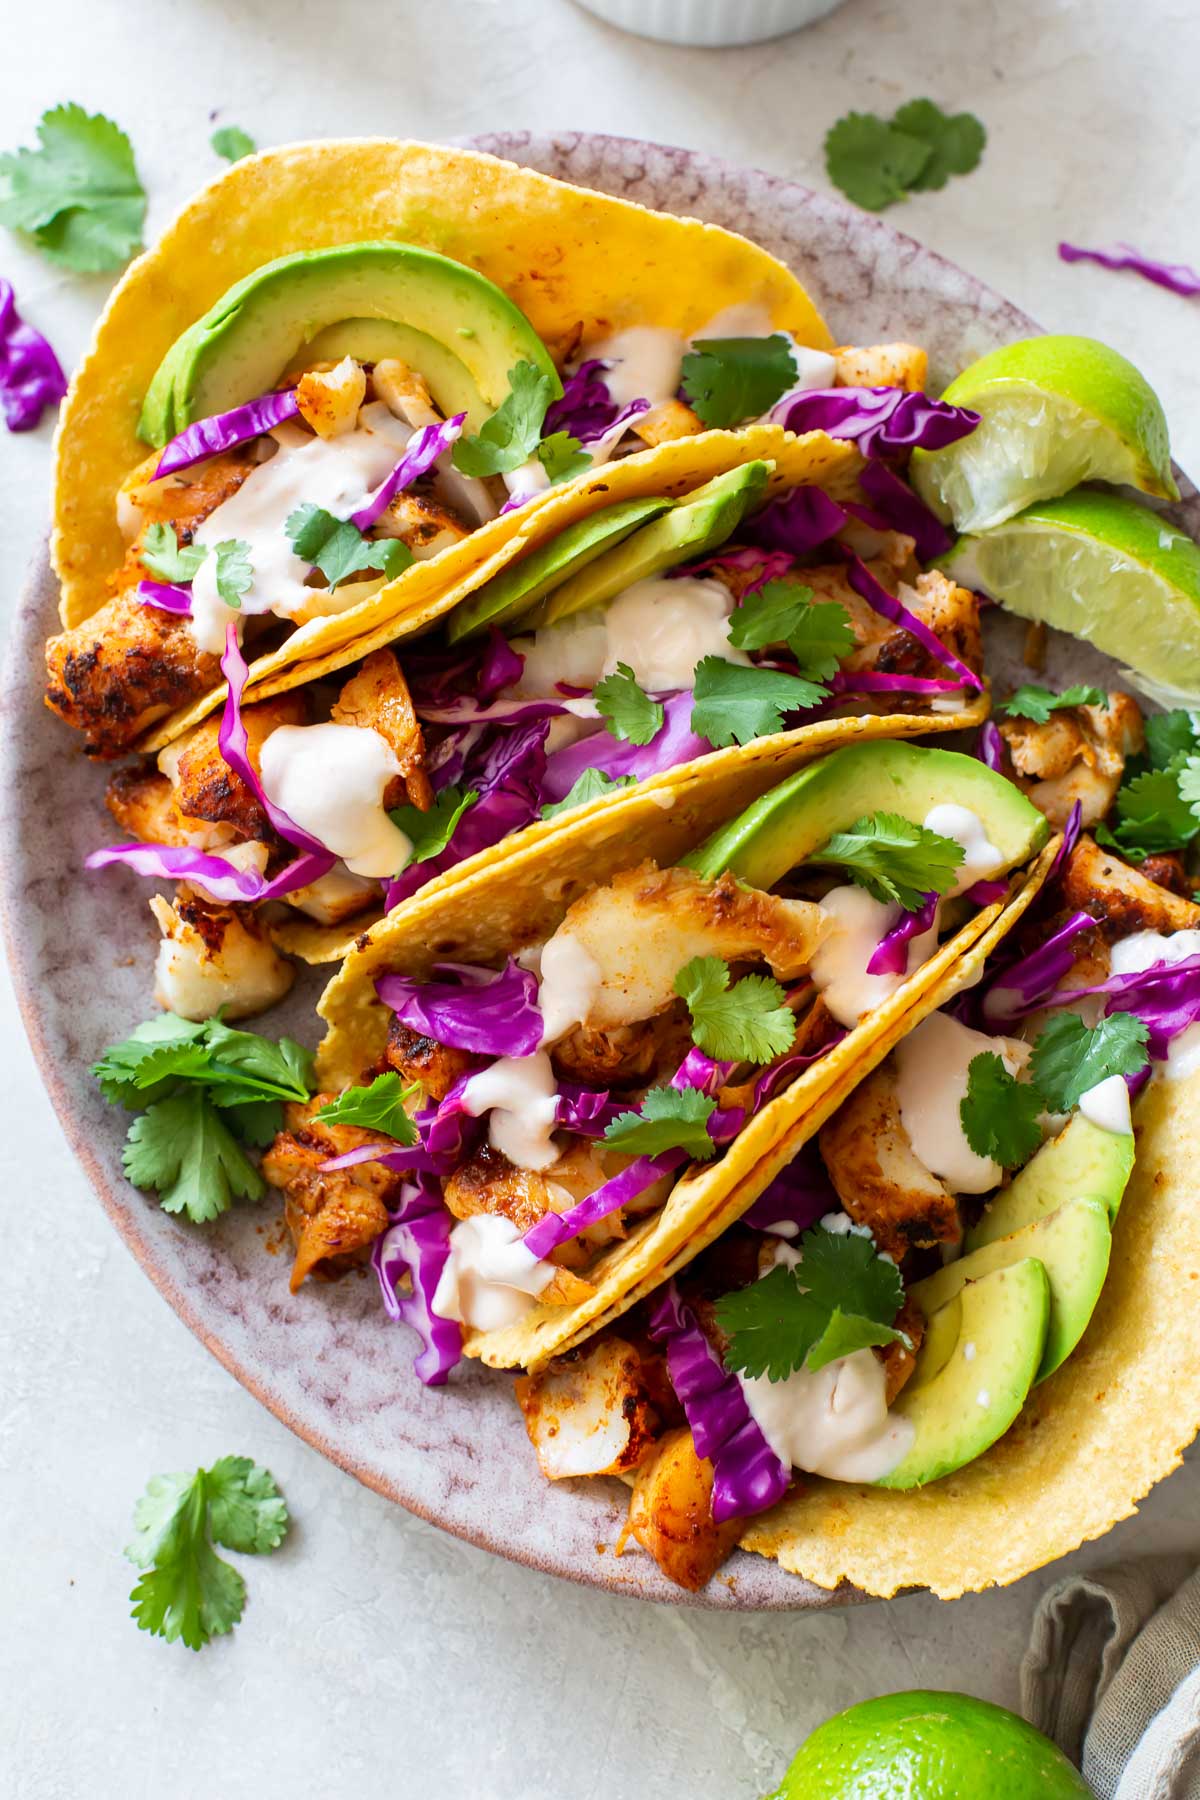 Easy Fish Tacos - The BEST Fish Taco Recipe with Fish Taco Sauce!